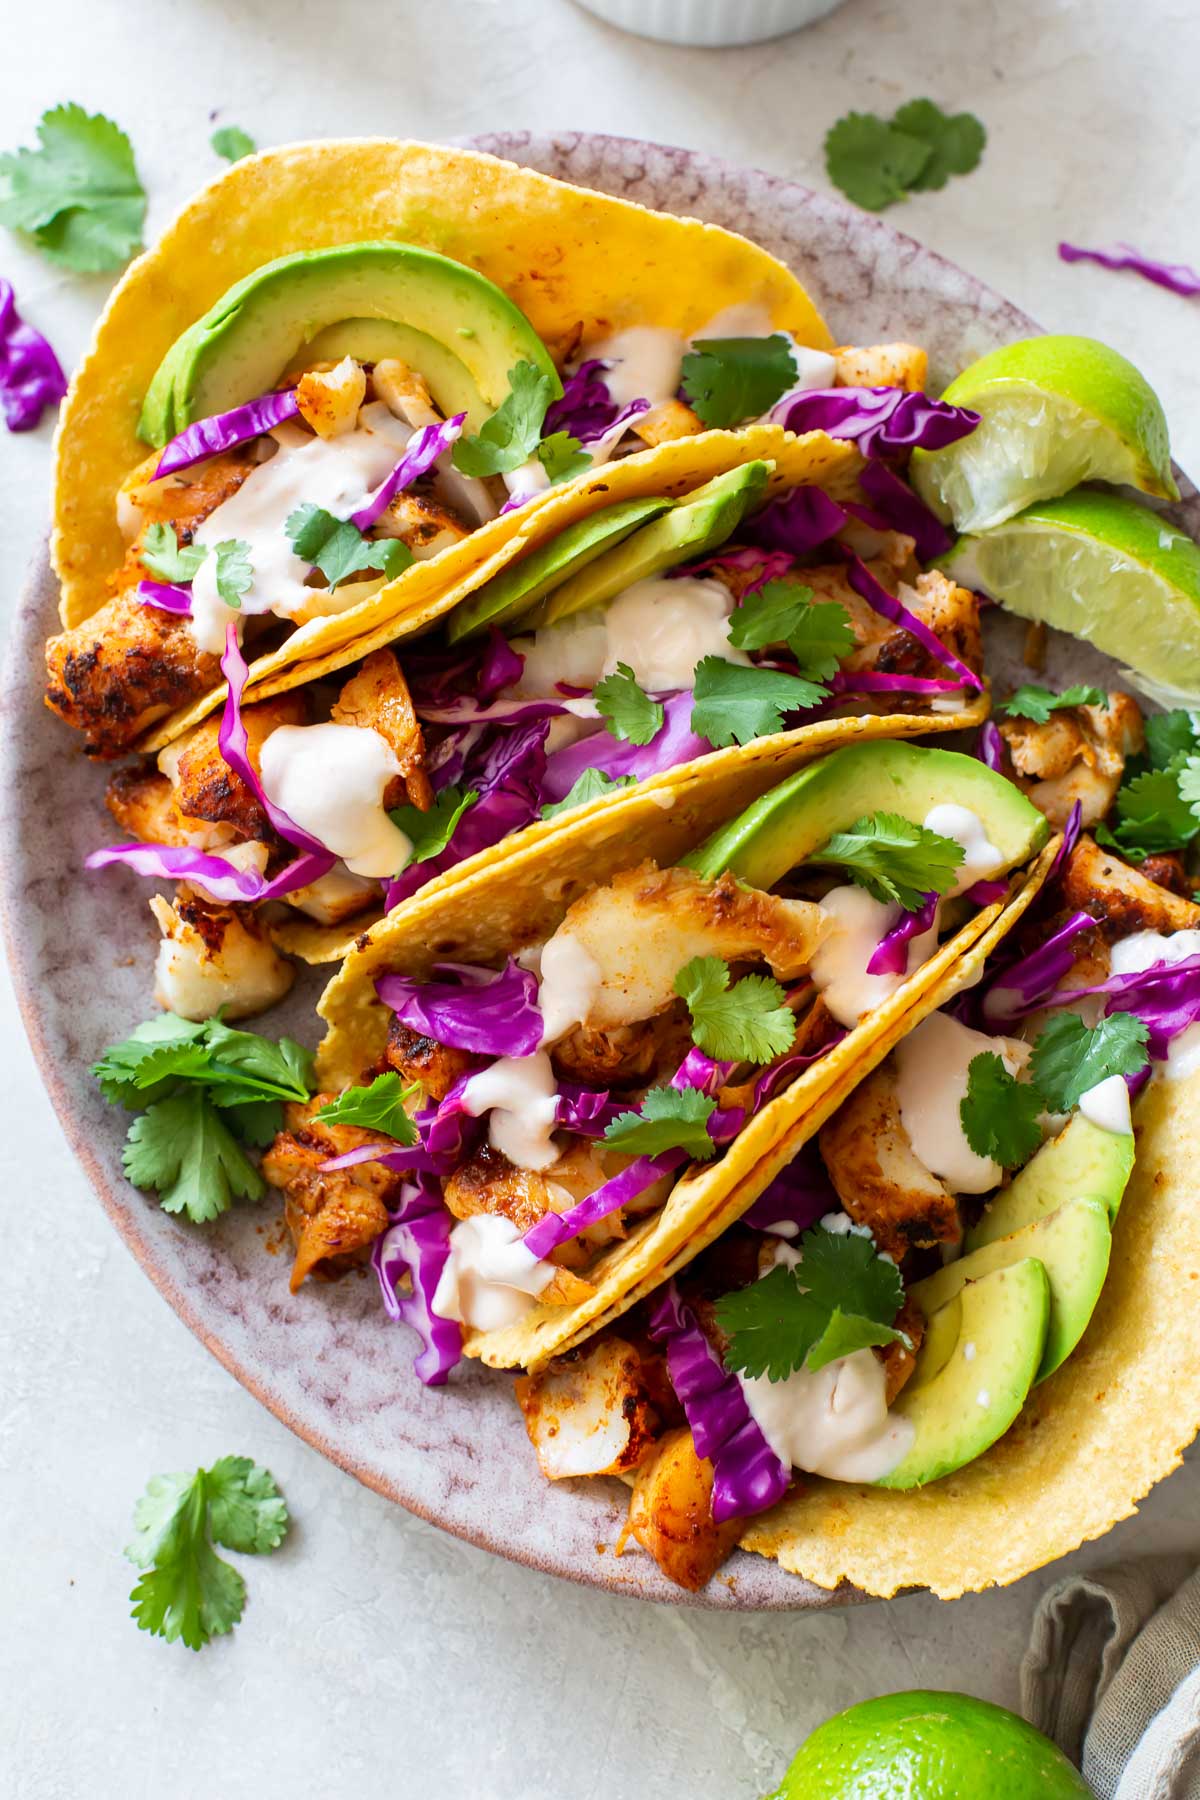 Easy Fish Tacos - The BEST Fish Taco Recipe with Fish Taco Sauce!